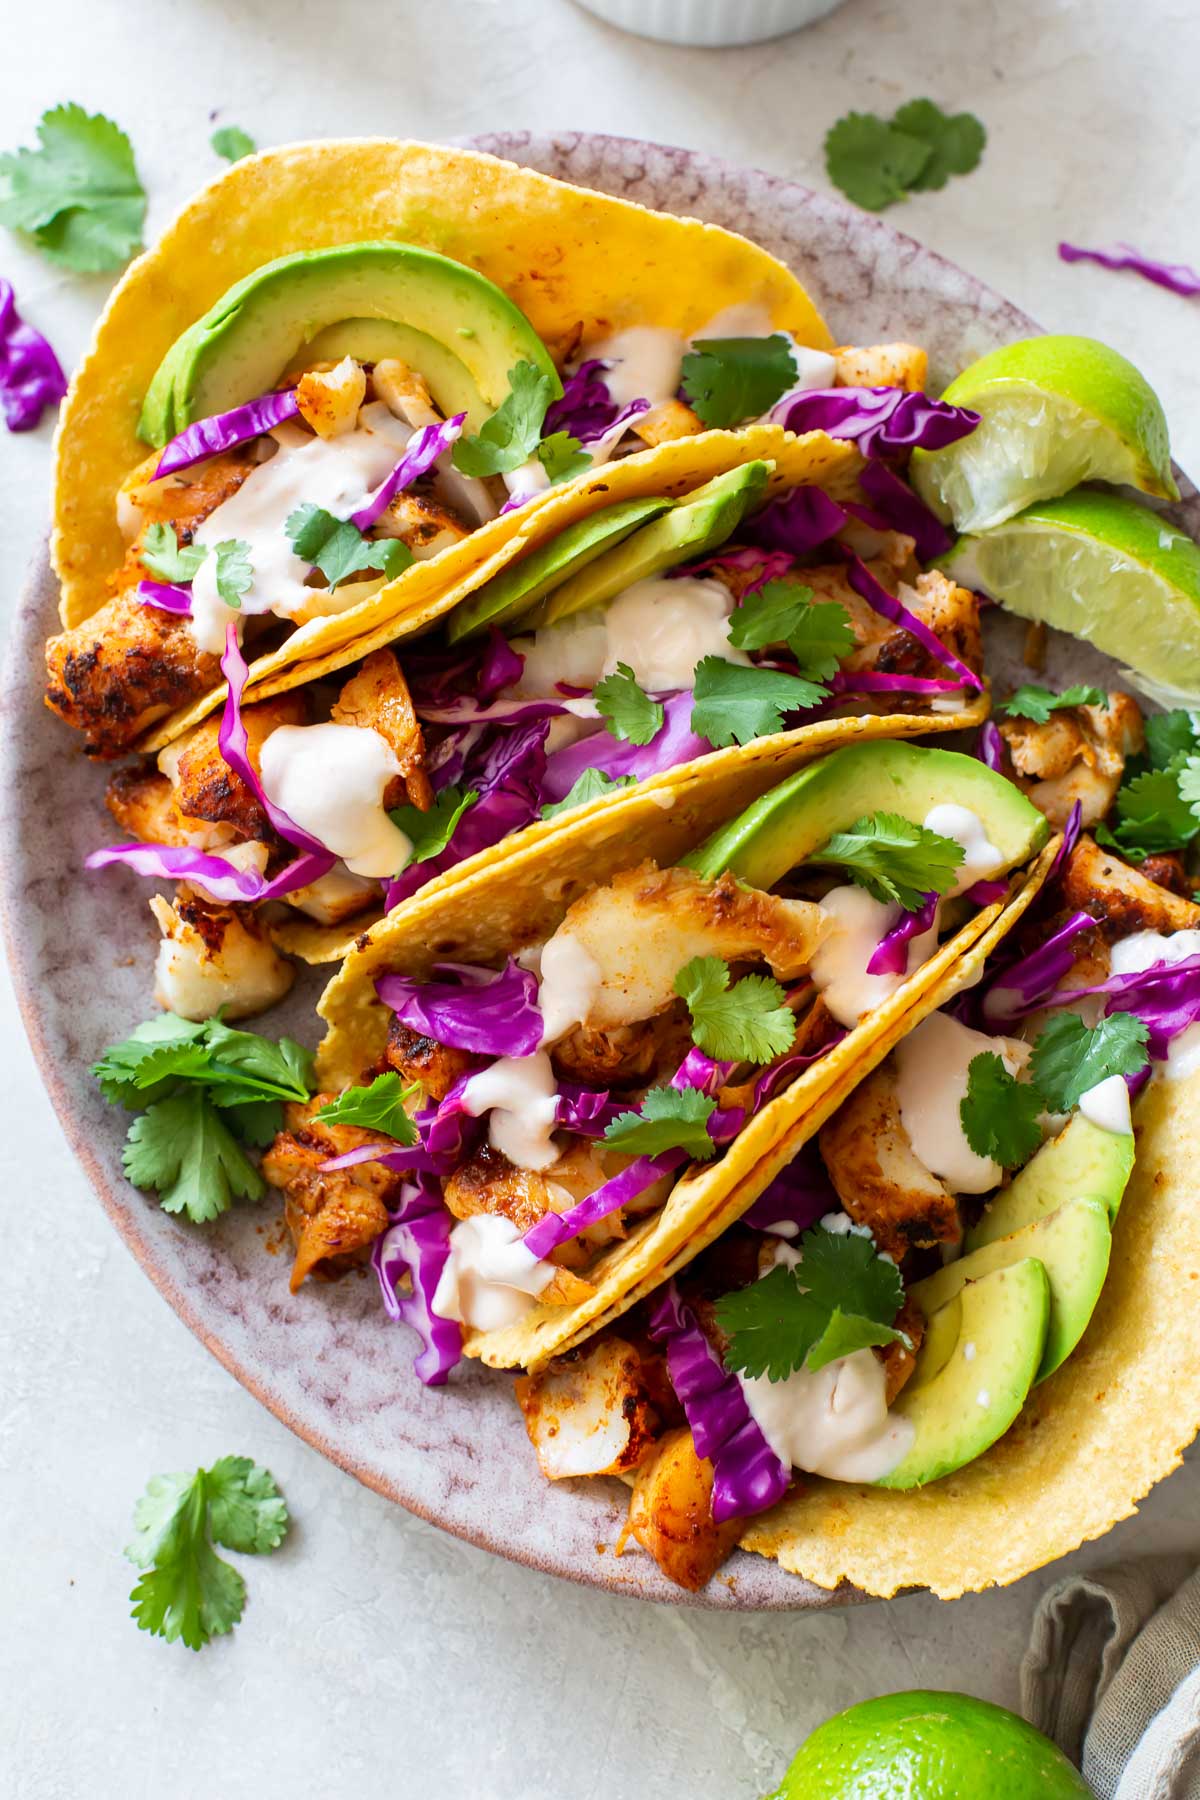 Easy Fish Tacos - The BEST Fish Taco Recipe with Fish Taco Sauce!